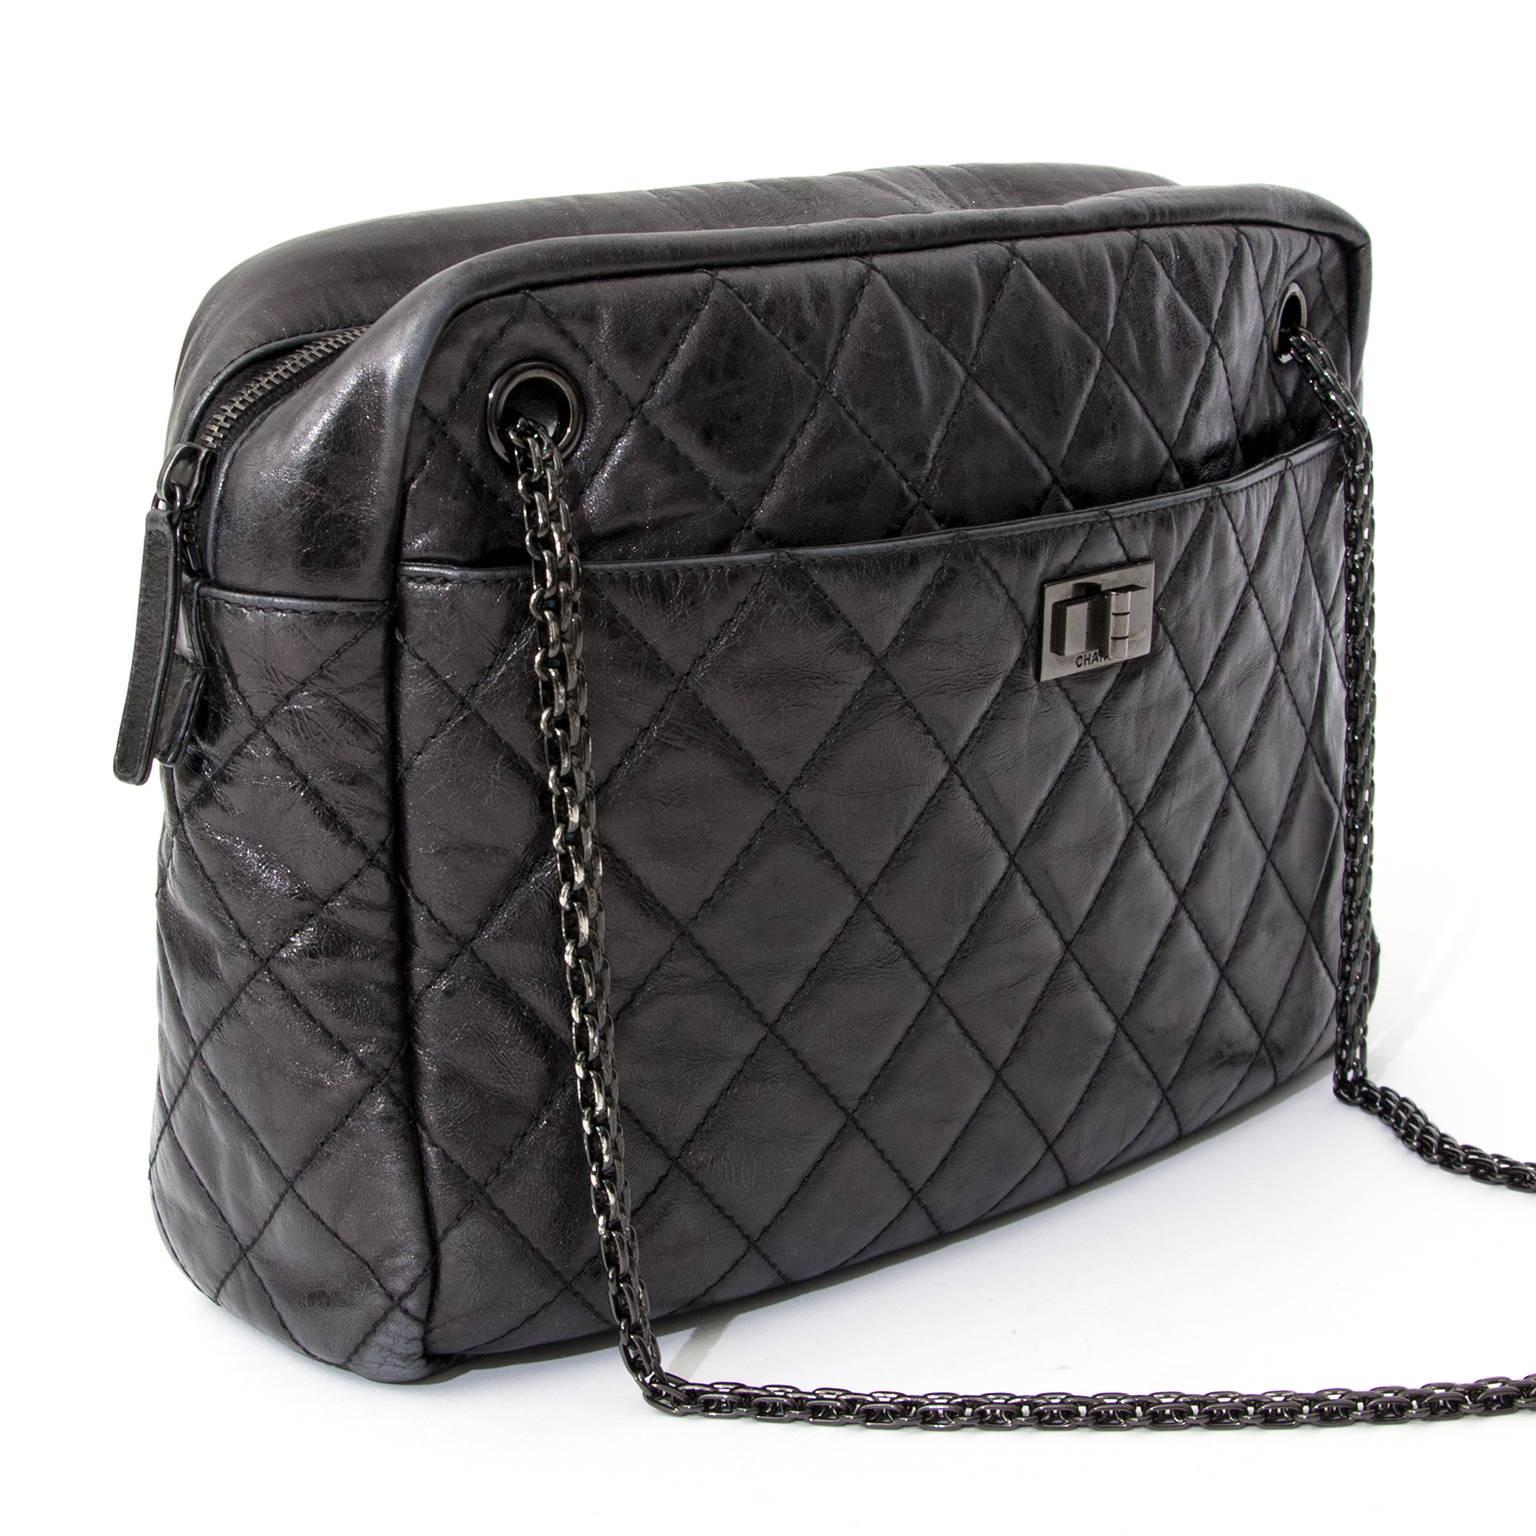 Go glam with this gorgeous and timeless black Chanel Reissue Camera Bag. It is made of black distressed quilted calfskin and features gunmetal hardware, Mademoiselle turnlock and exquisite chain straps. This versatile bag is perfect for everyday use